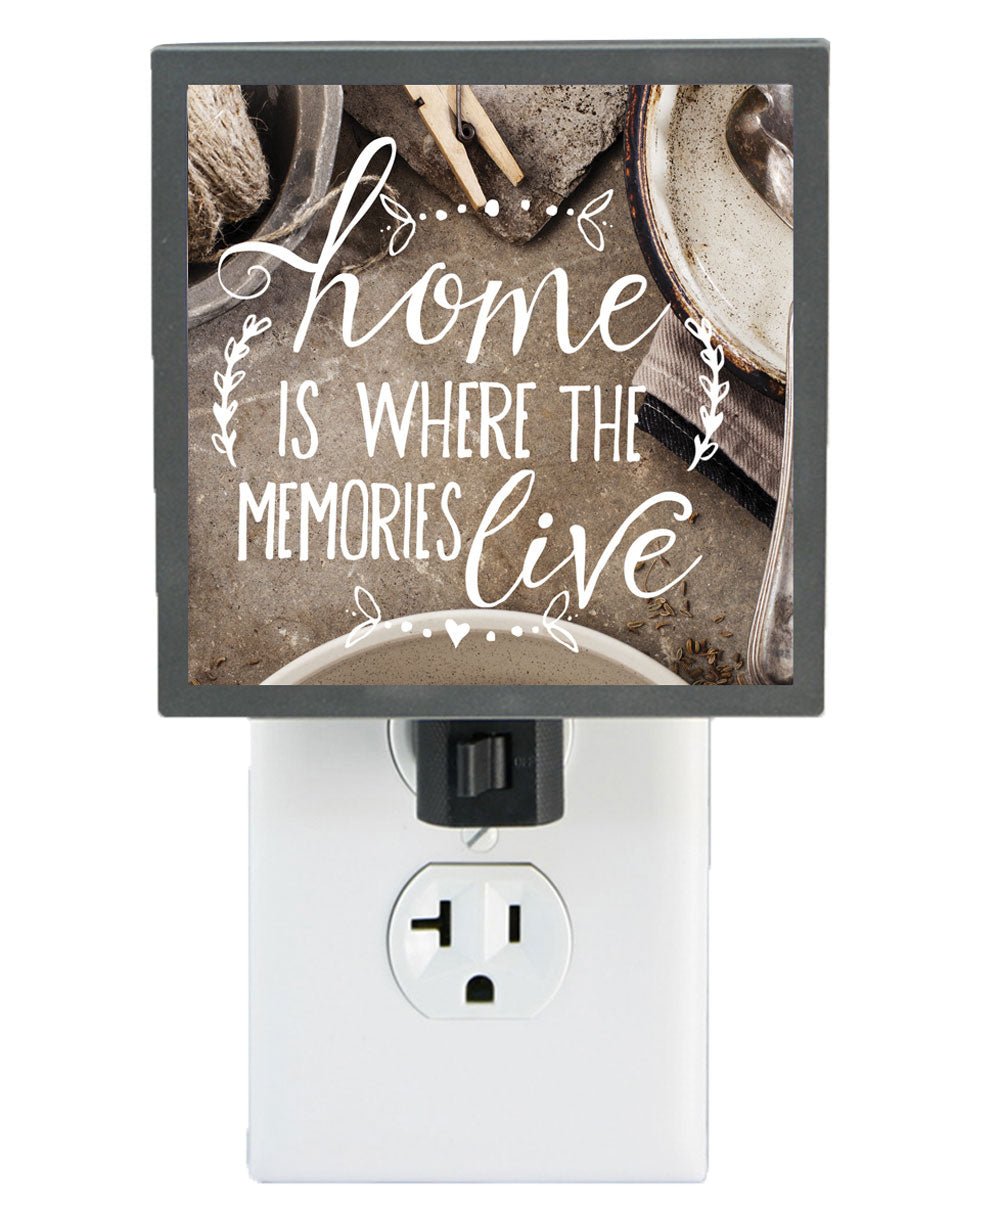 Home And Family Inspirational Photo Nightlight - Thoughtful Accents Home is Where Memories Live